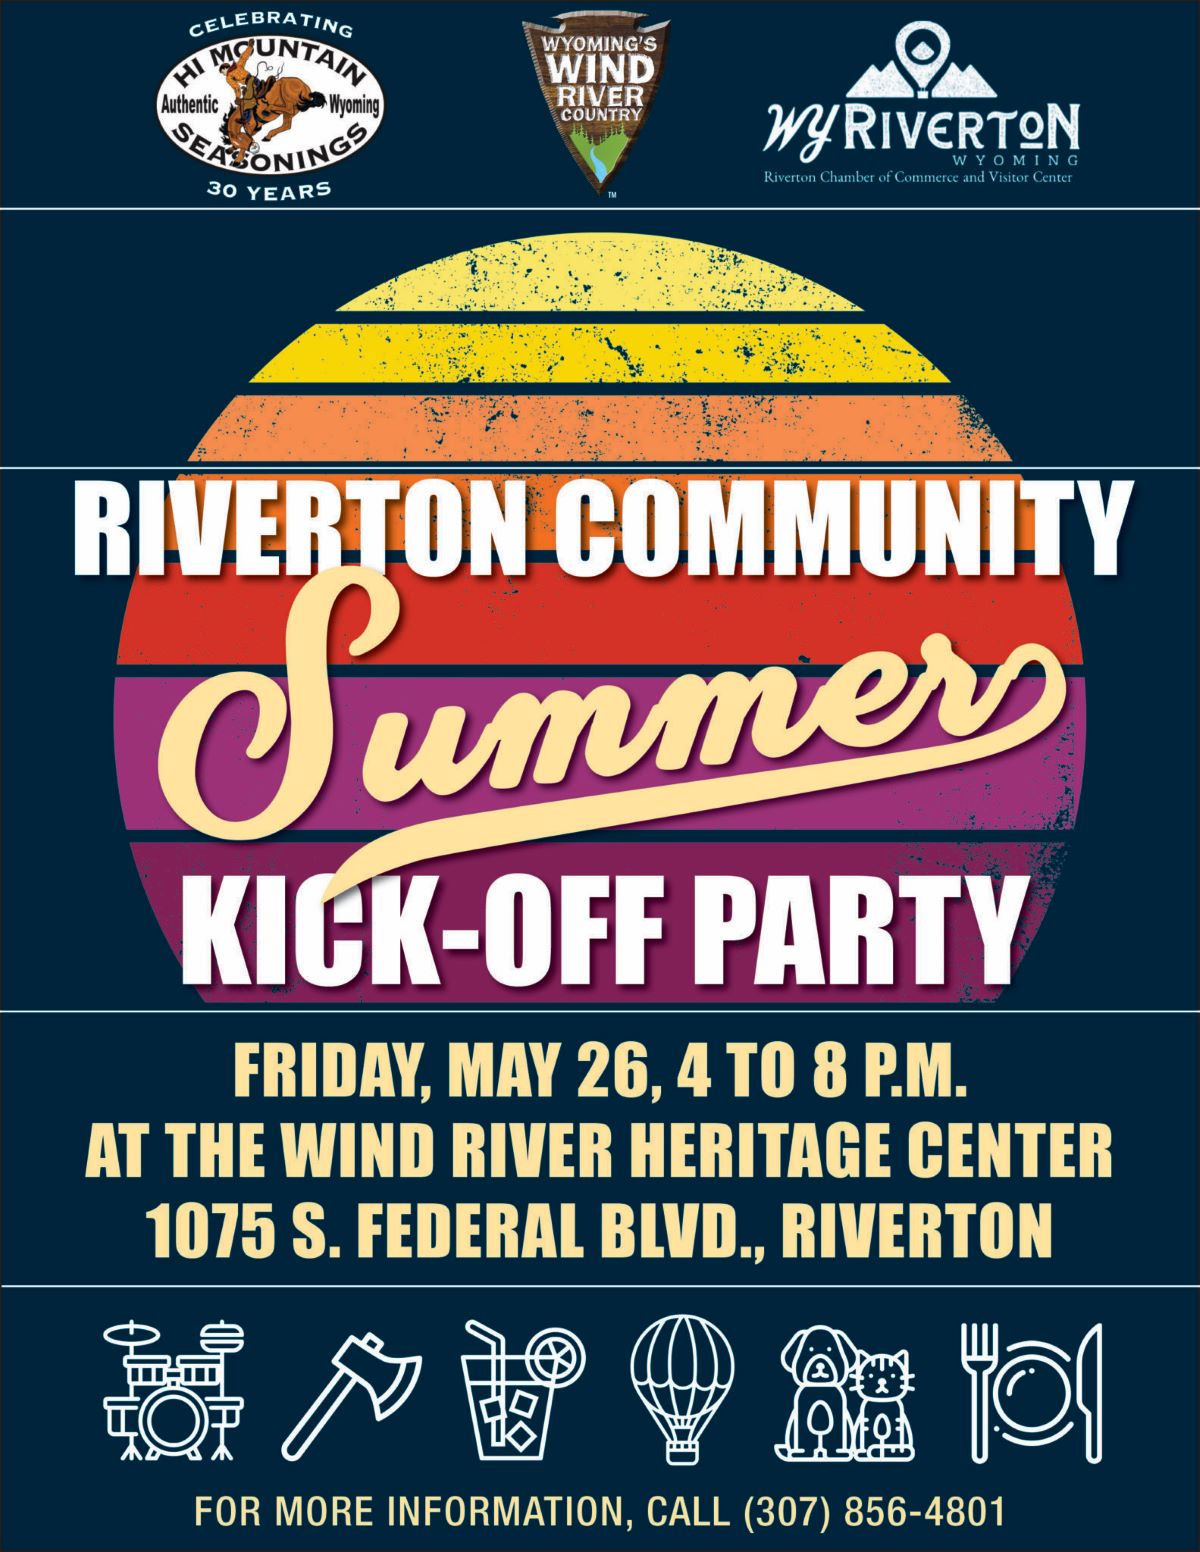 A colorful flyer for the Riverton Community Summer Kick-Off Party in Wind River featuring local landmarks, indicating an event filled with music, food, and games.